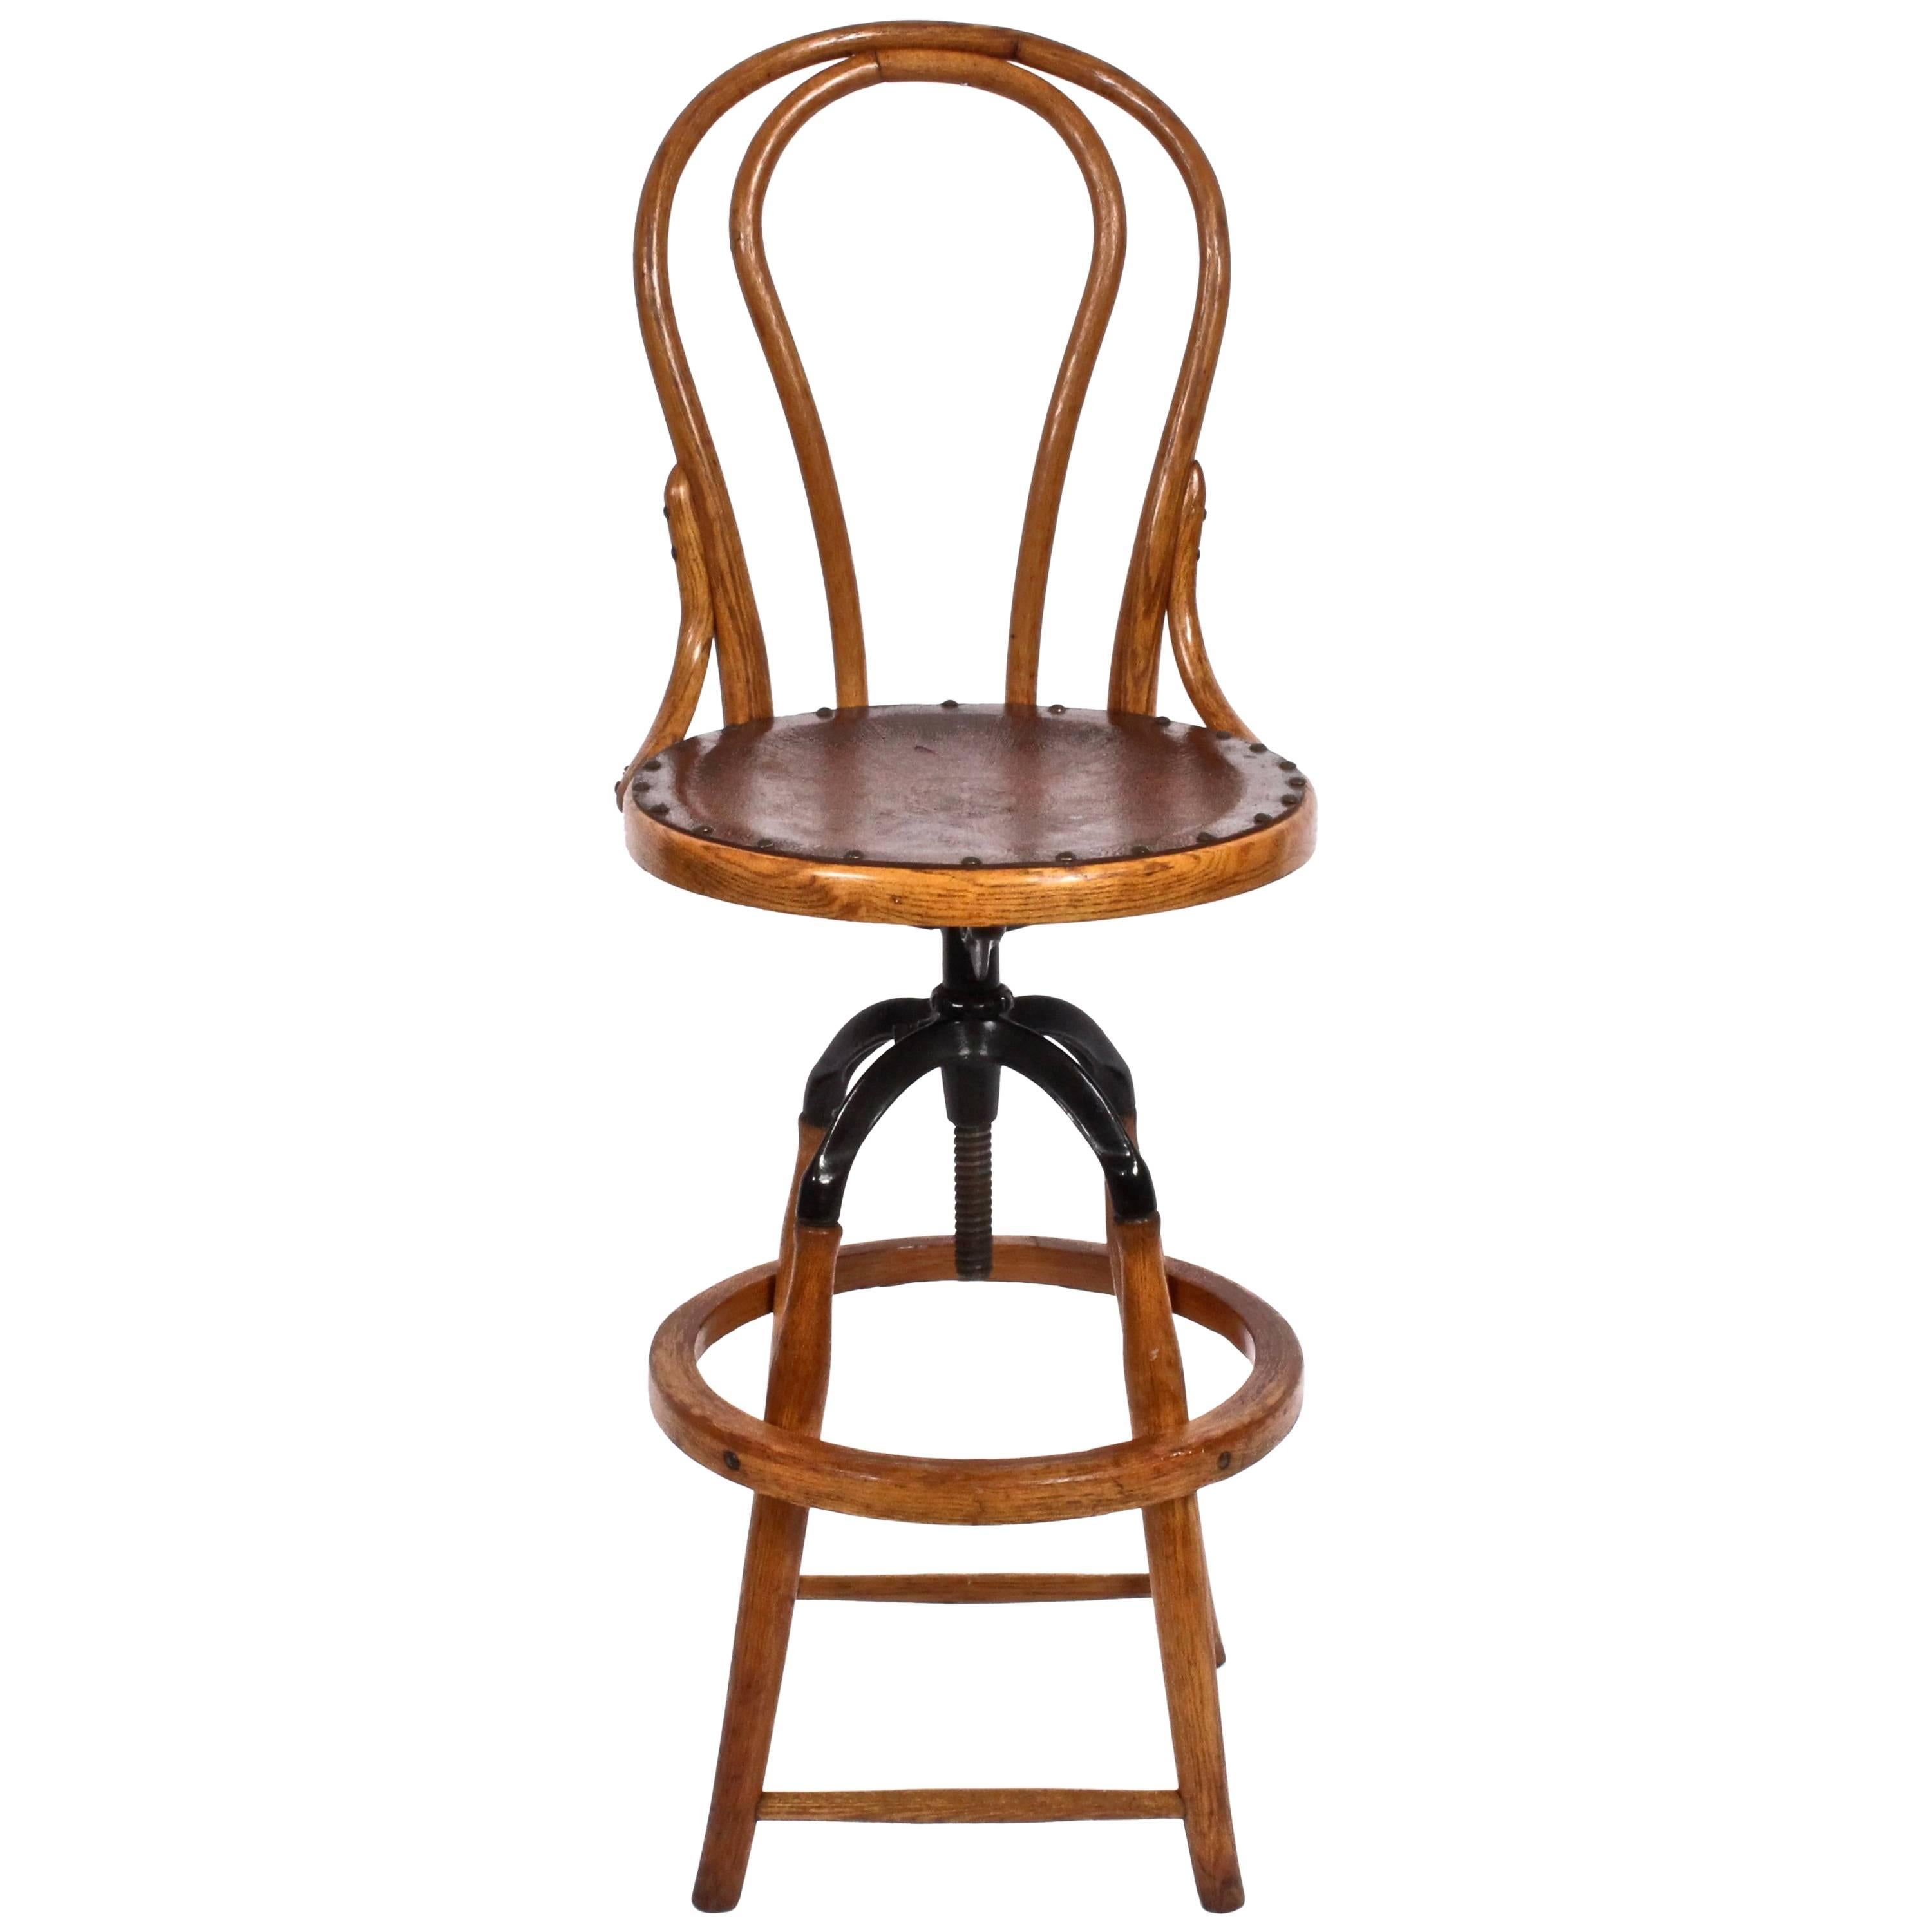  Circa 1910 Adjustable High Back Swivel Chair in Oak Bentwood and Cast Iron